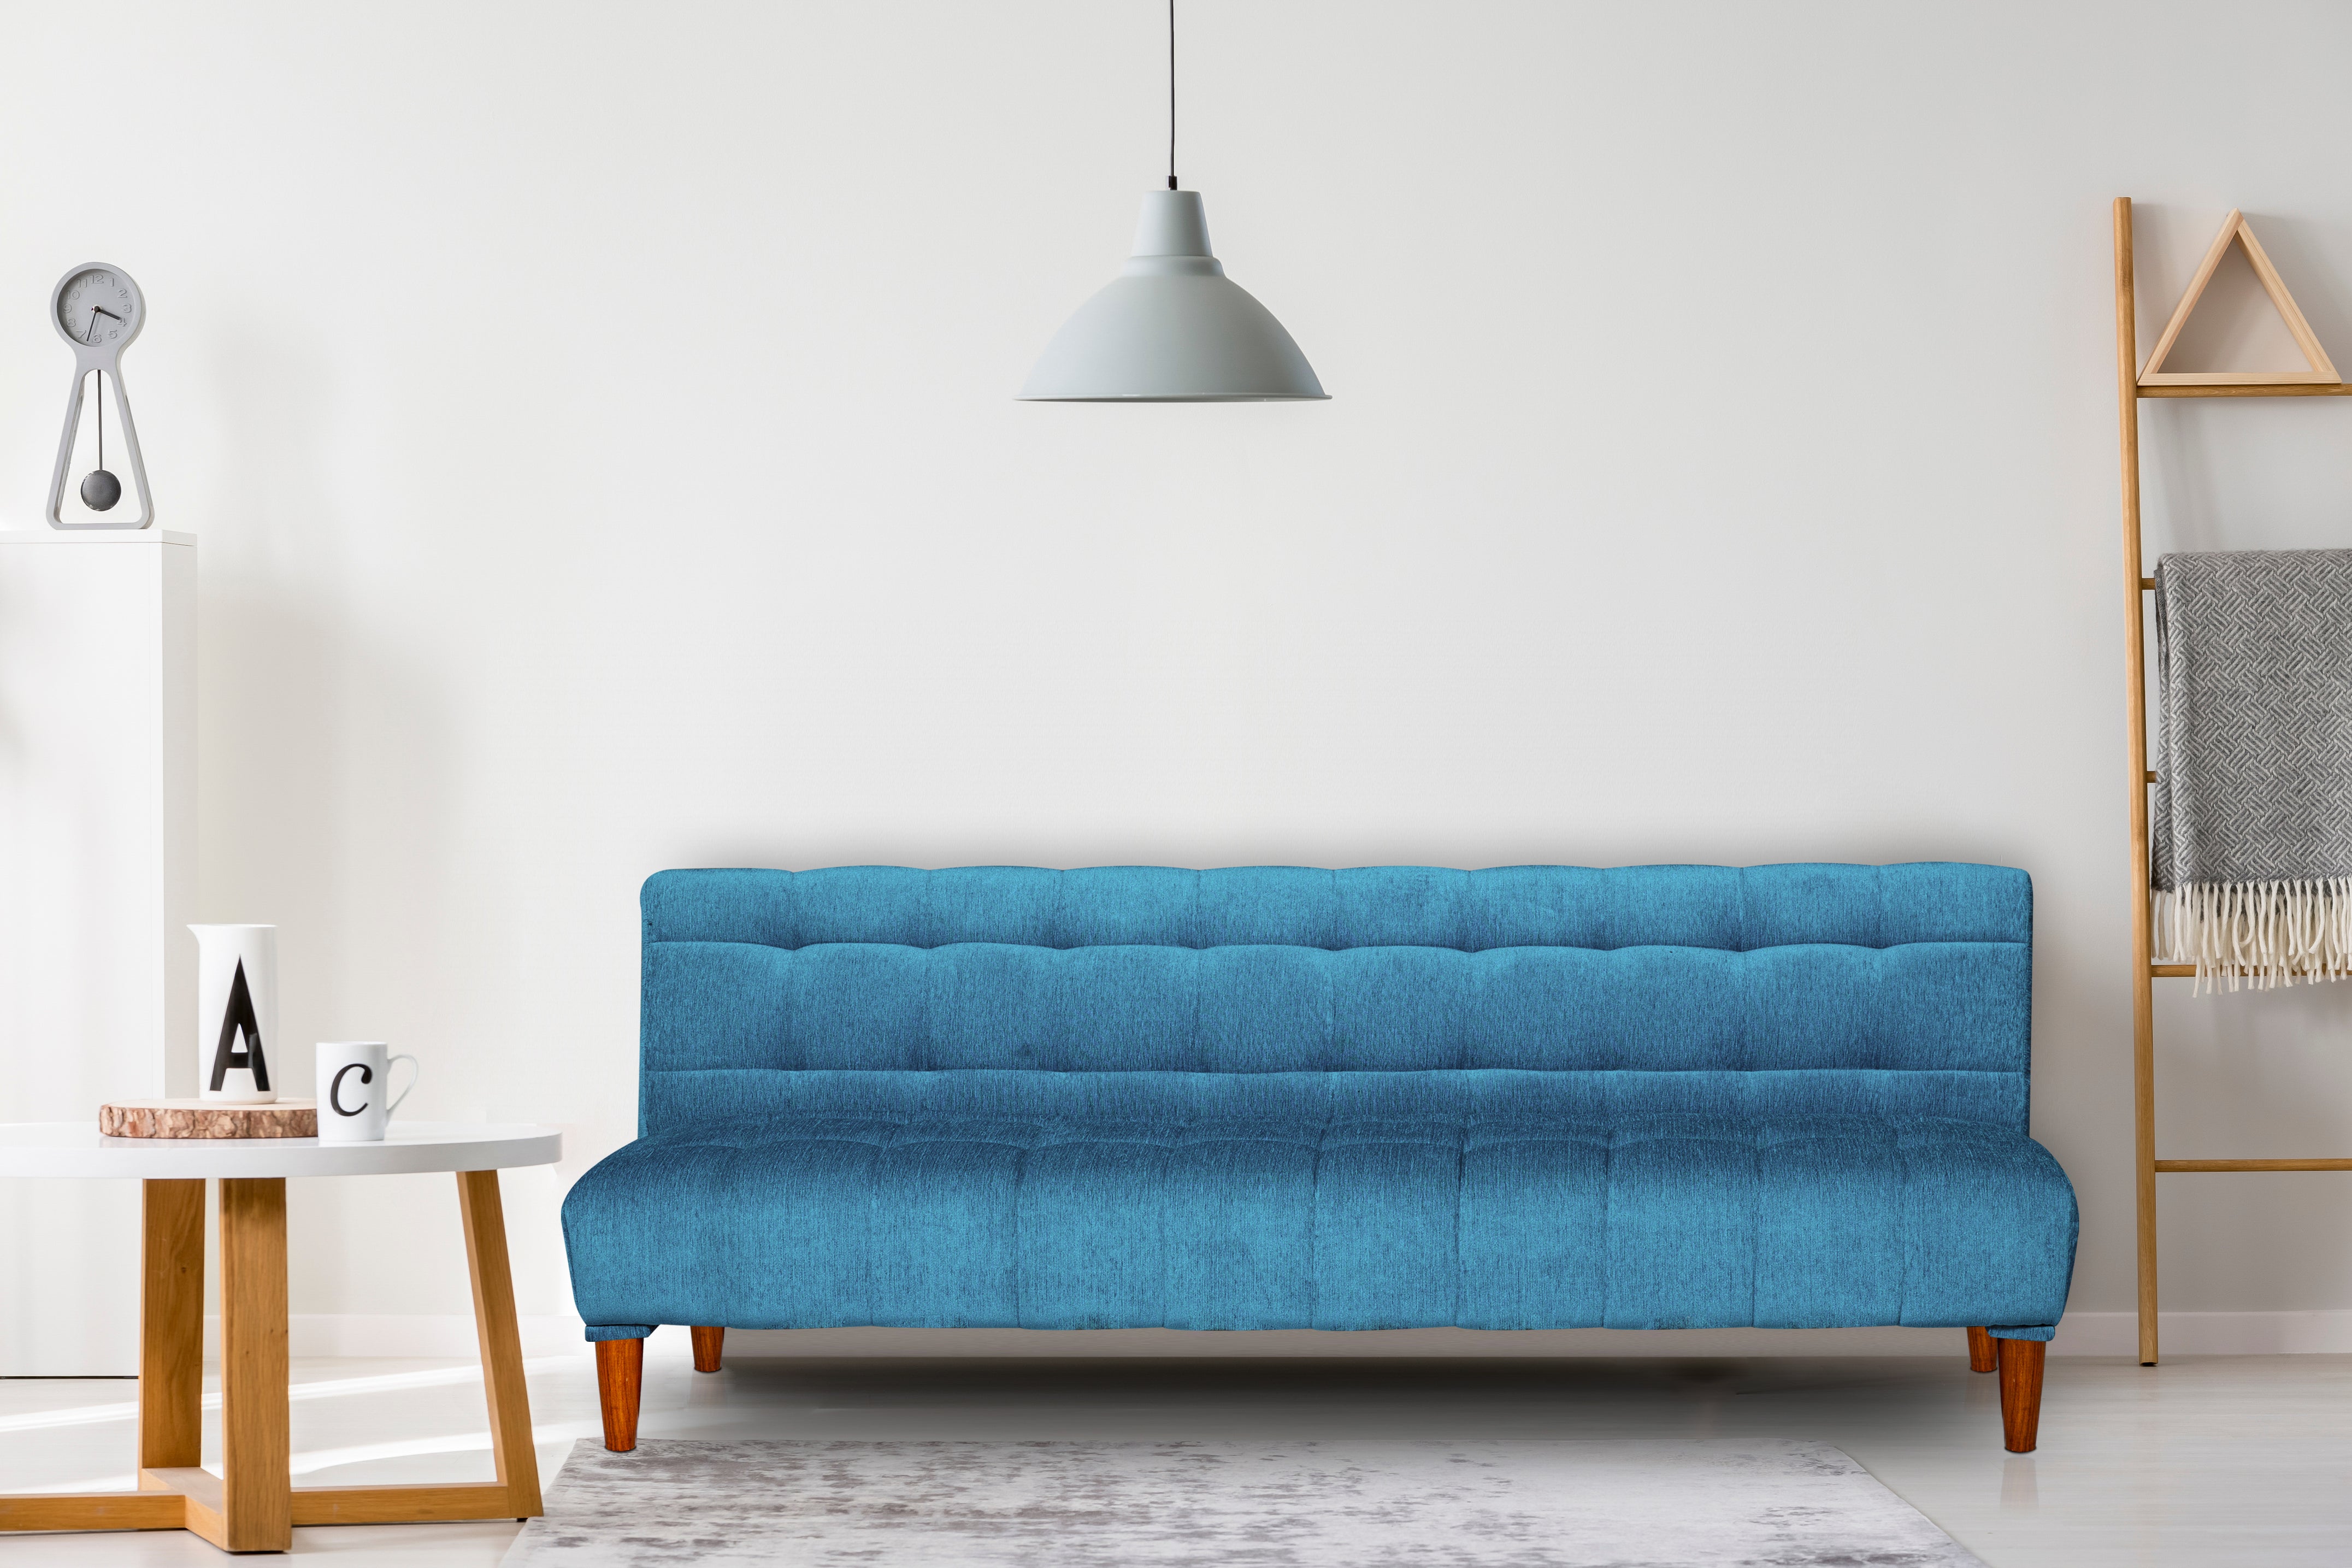 Seventh Heaven Florida Neo 4 Seater Wooden Sofa Cum Bed Modern & Elegant Smart Furniture Range for luxurious homes, living rooms and offices. Use as a sofa, lounger or bed. Perfect for guests. Molphino fabric with sheesham polished wooden legs. Sky Blue colour.